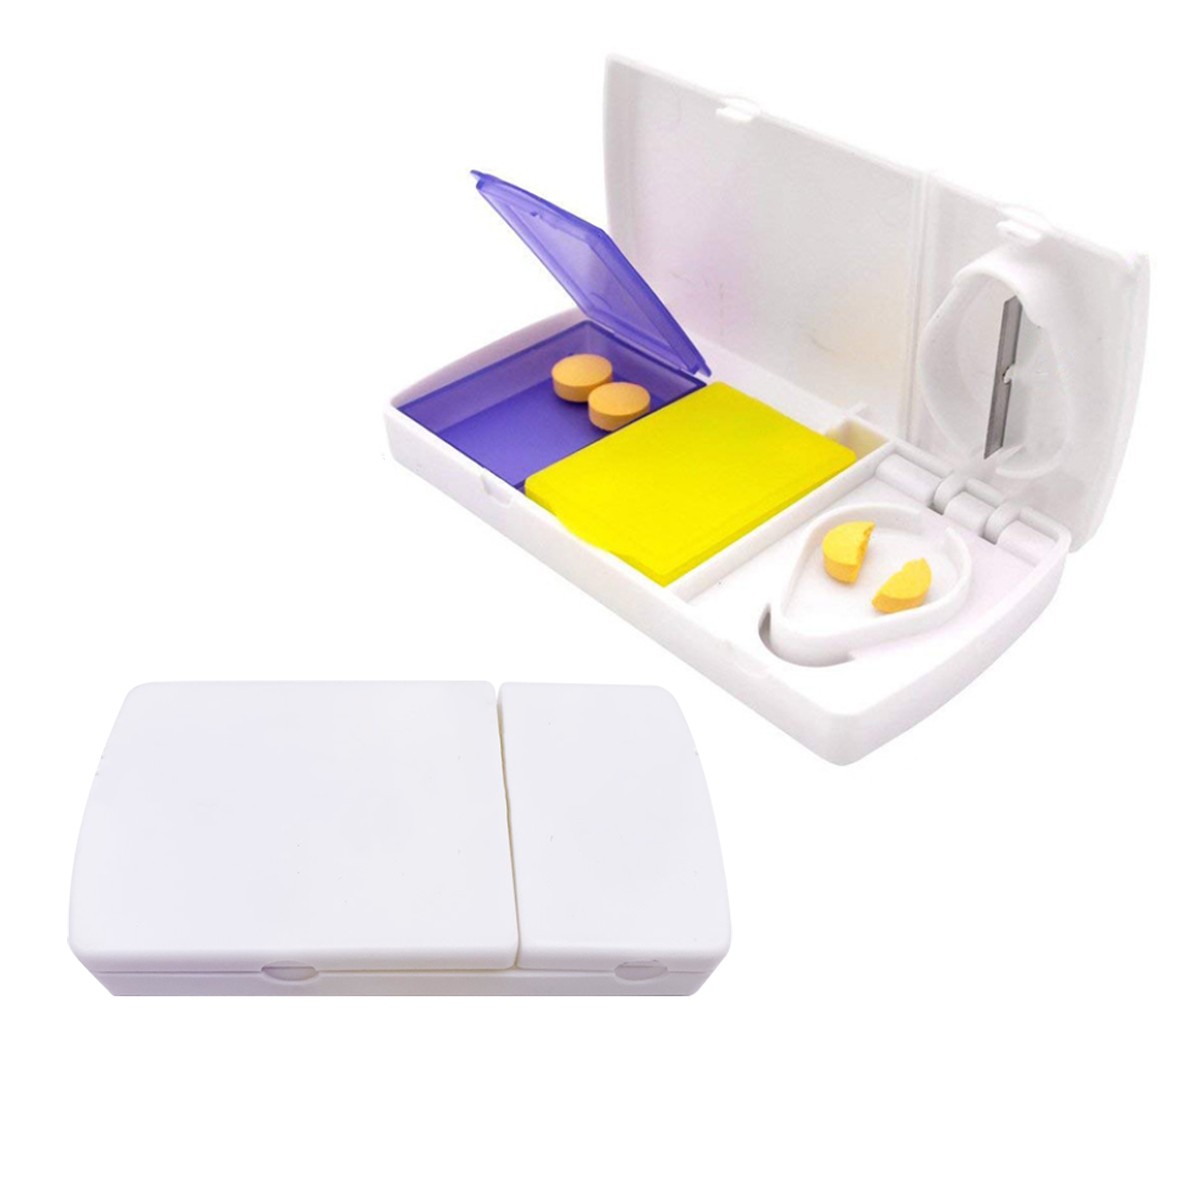 Portable 2-in-1 Pill Cutter and Organizer